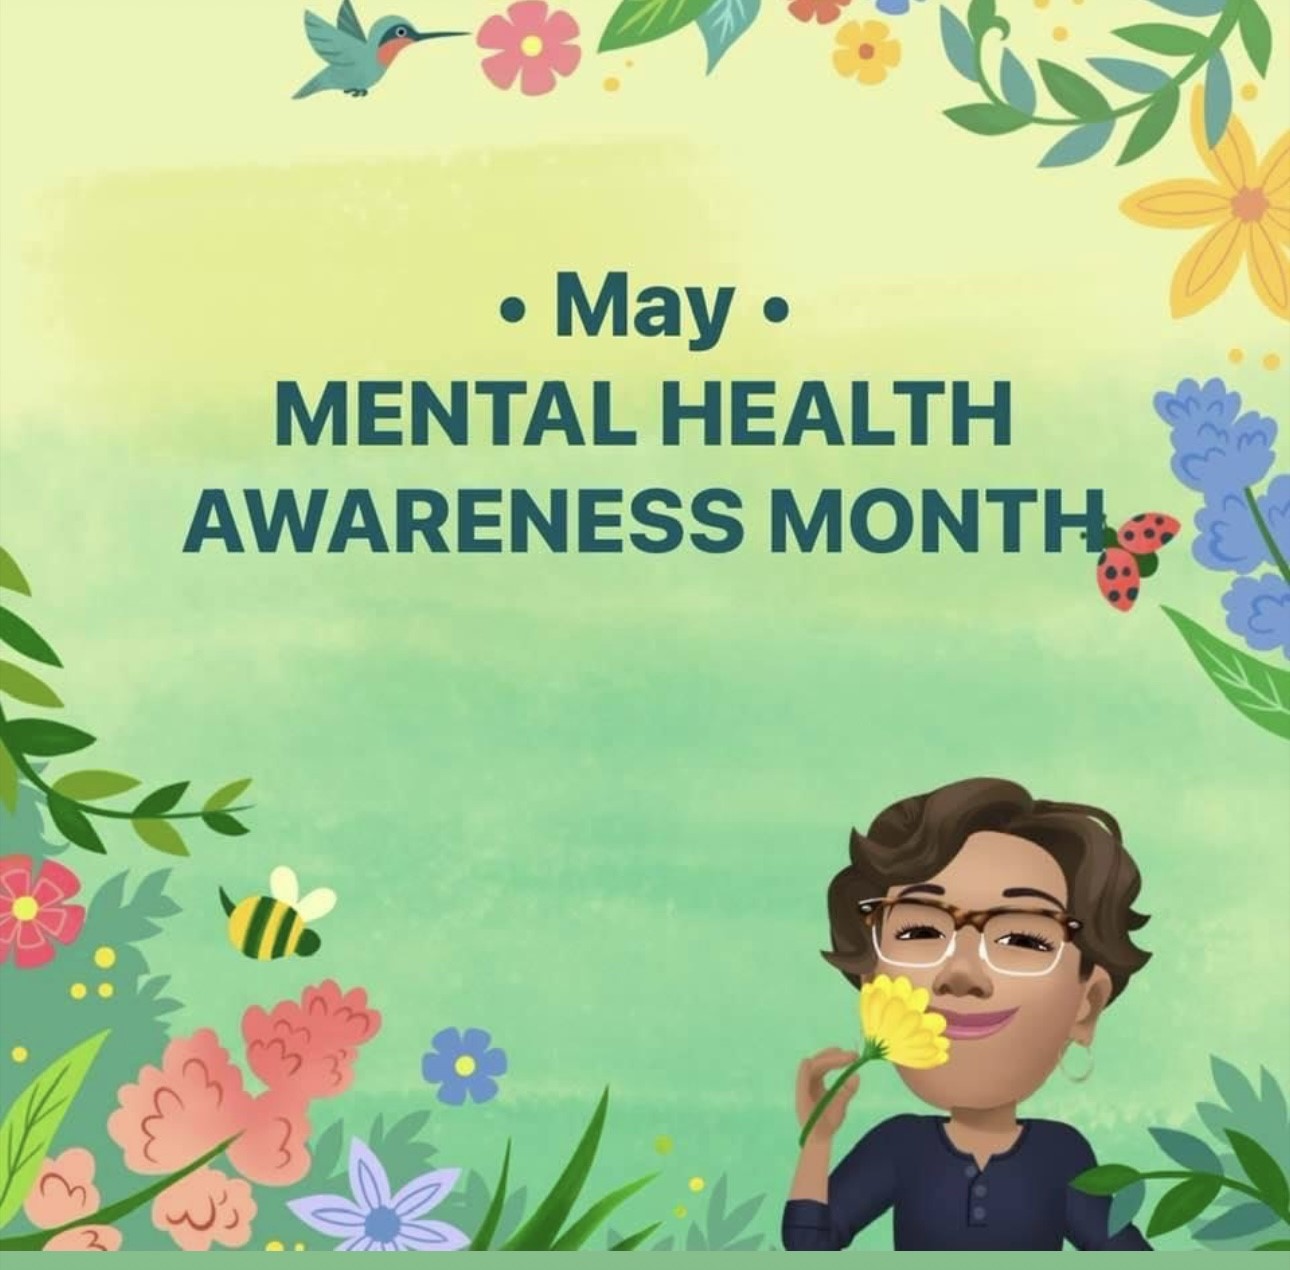 For Mental Health Awareness Month